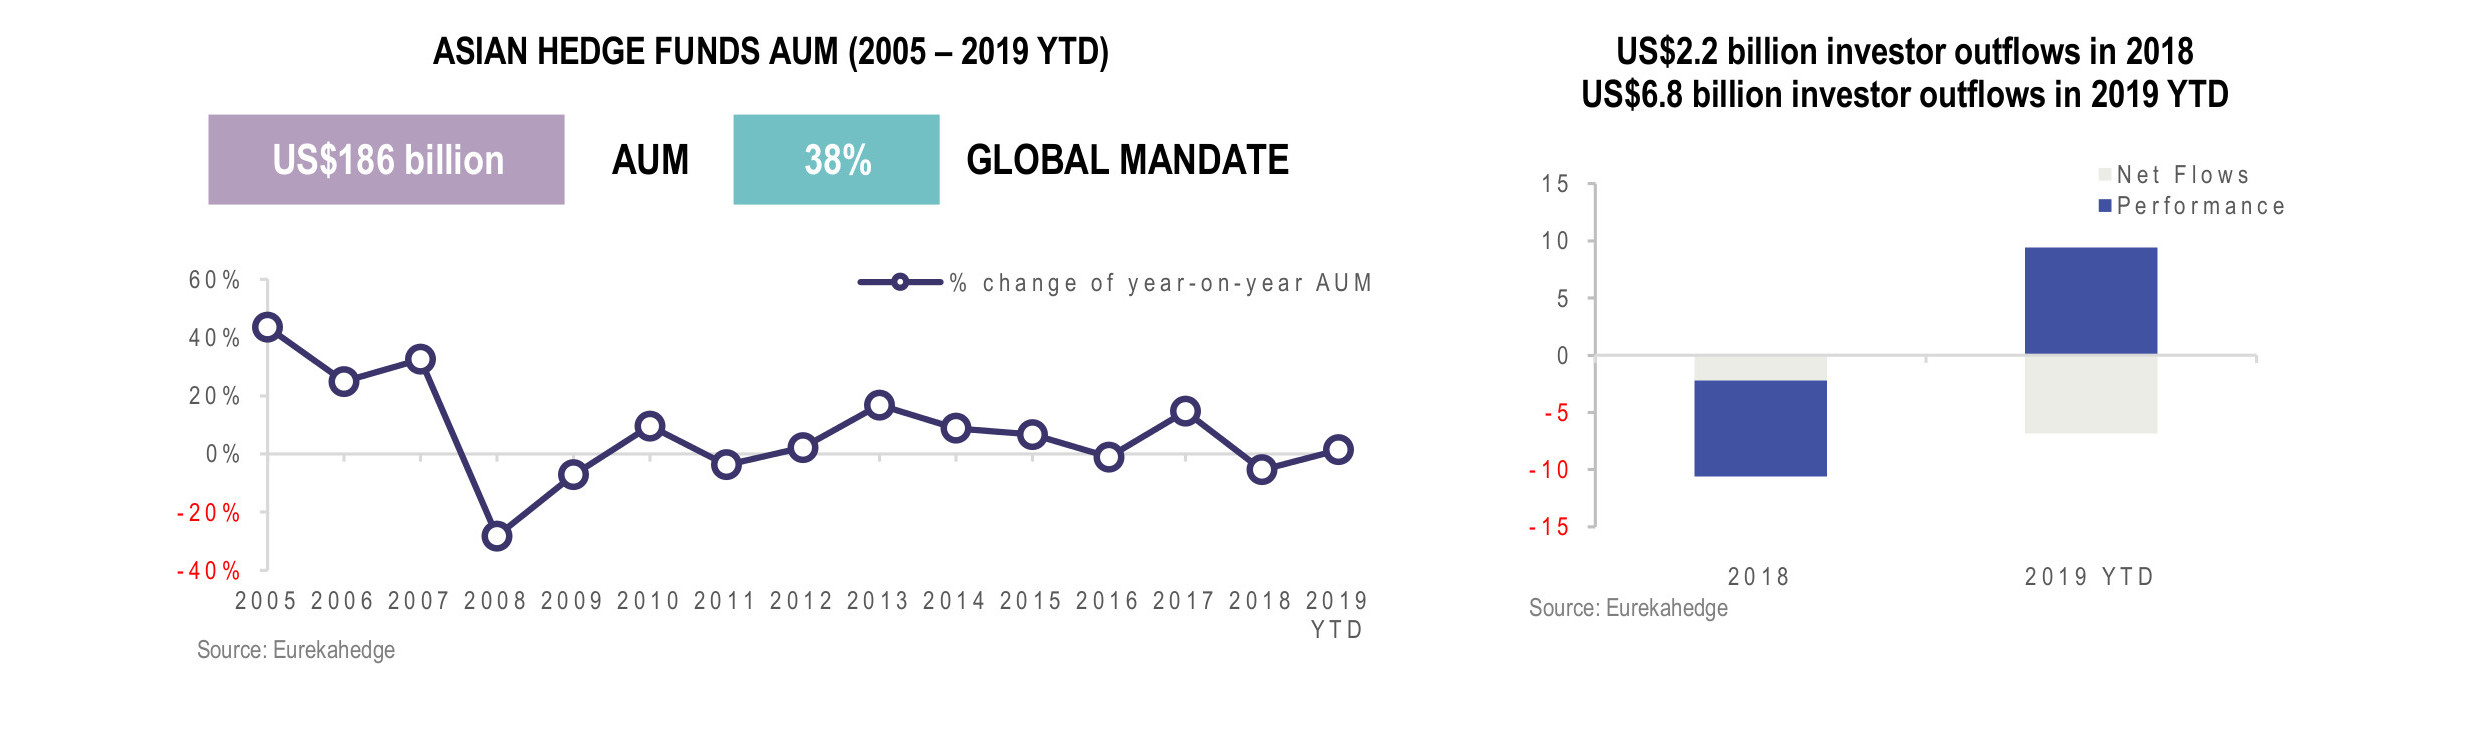 Asian Hedge Funds Infographic September 2019 - AUM